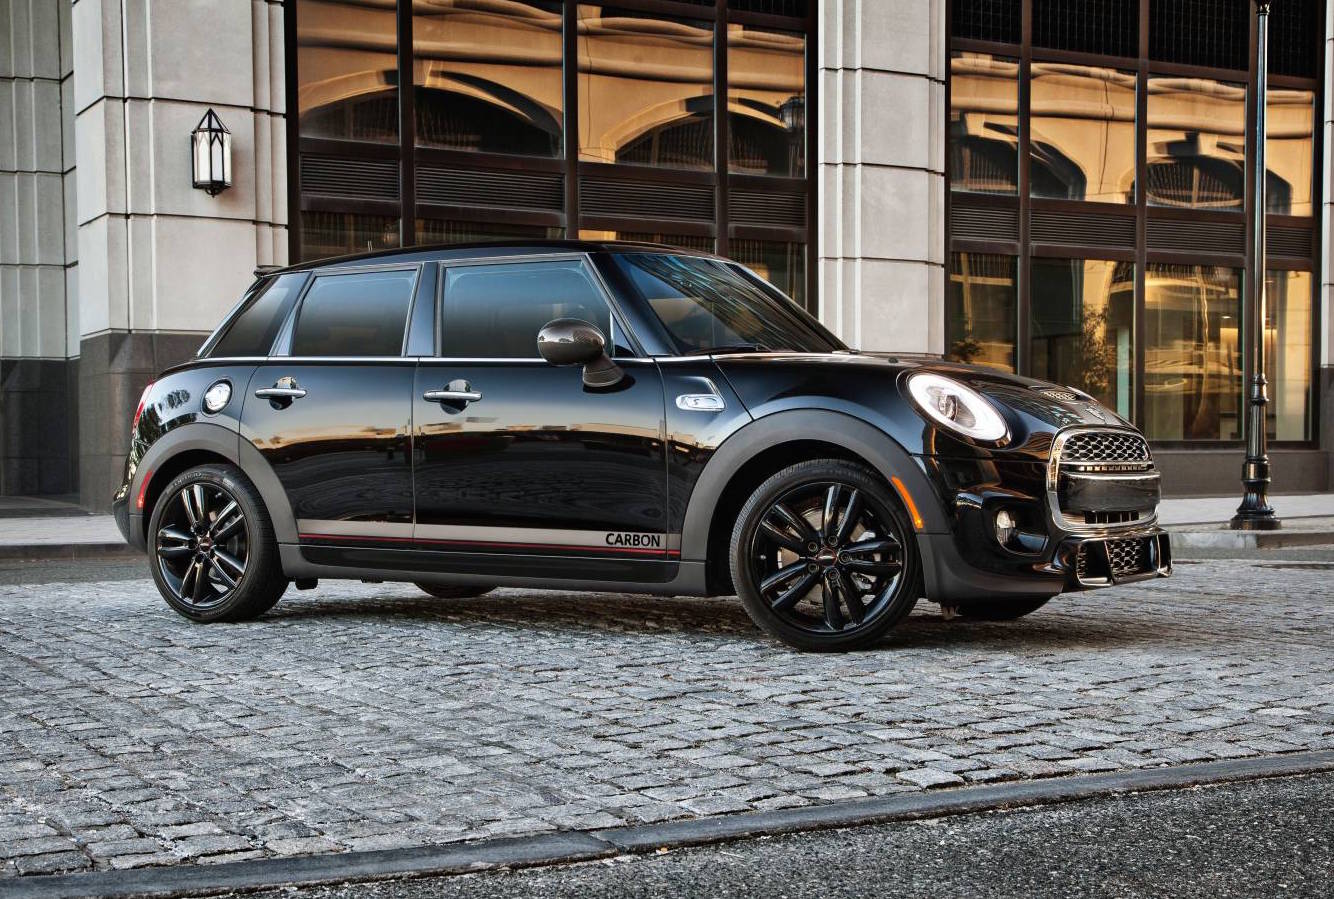 MINI 5 Door Carbon Edition on sale in Australia from $56,900